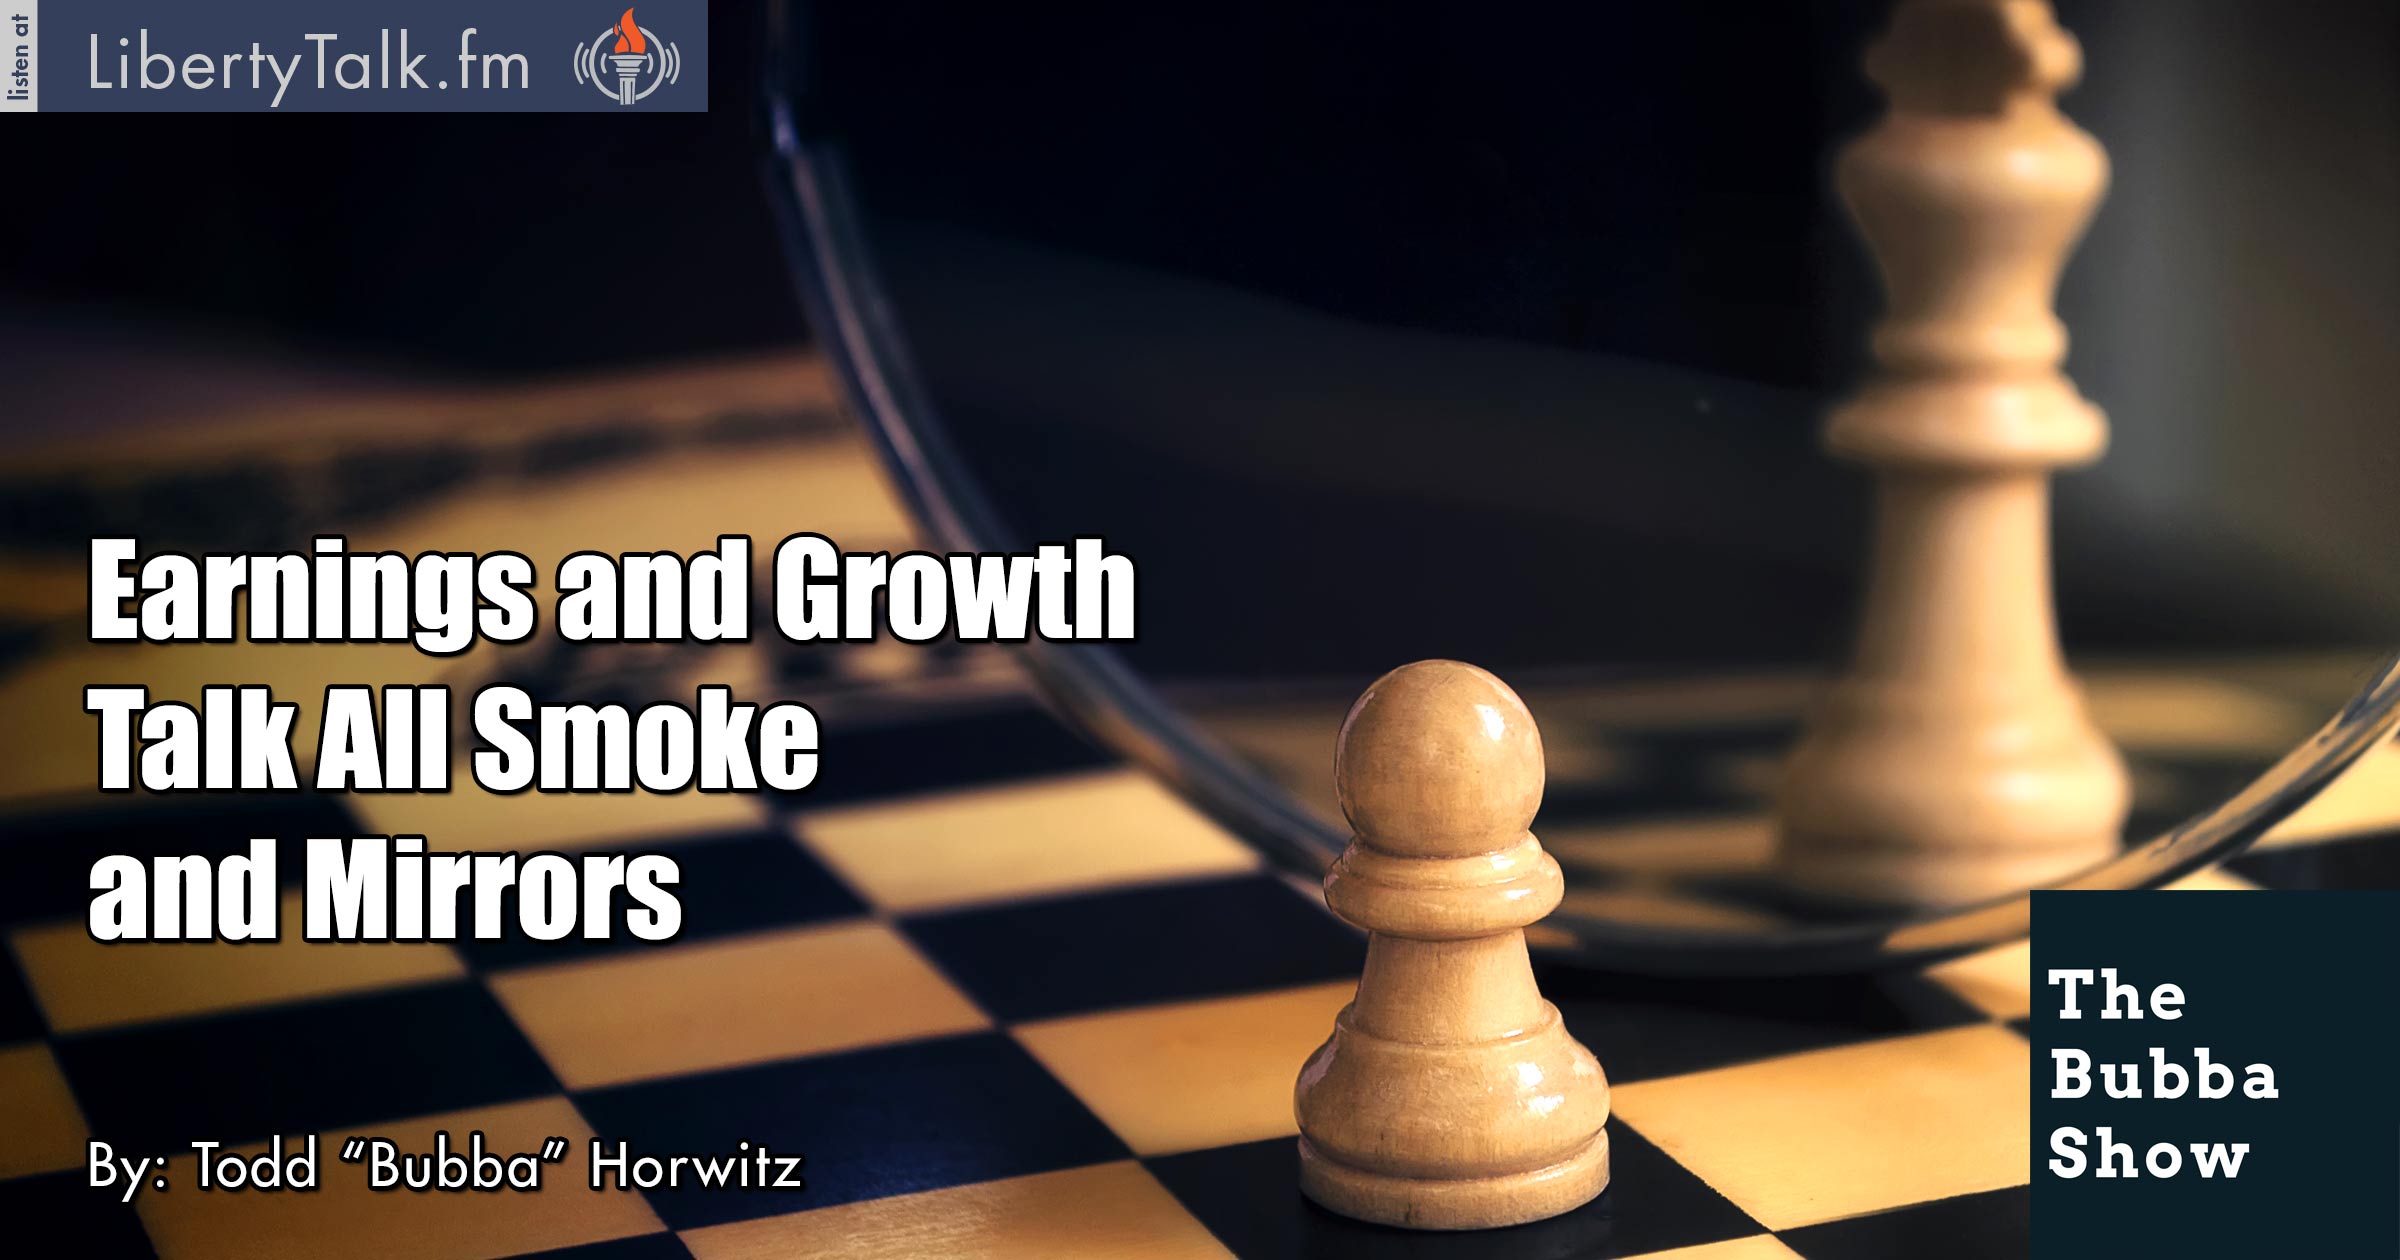 Earnings and Growth Talk All Smoke and Mirrors - The Bubba Show